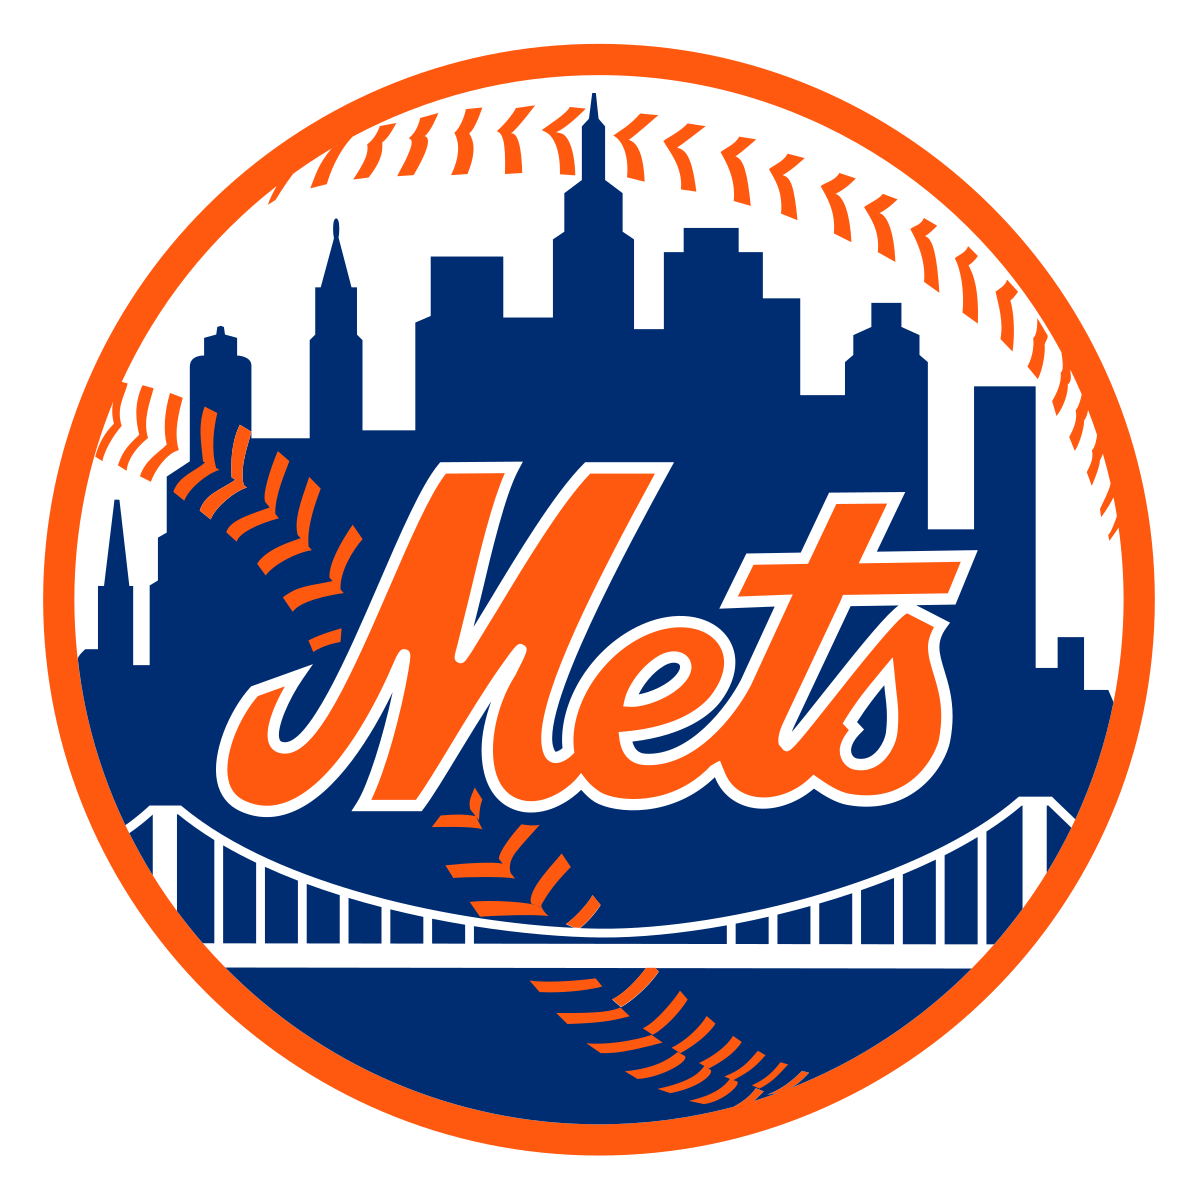 Logos and uniforms of the new york mets